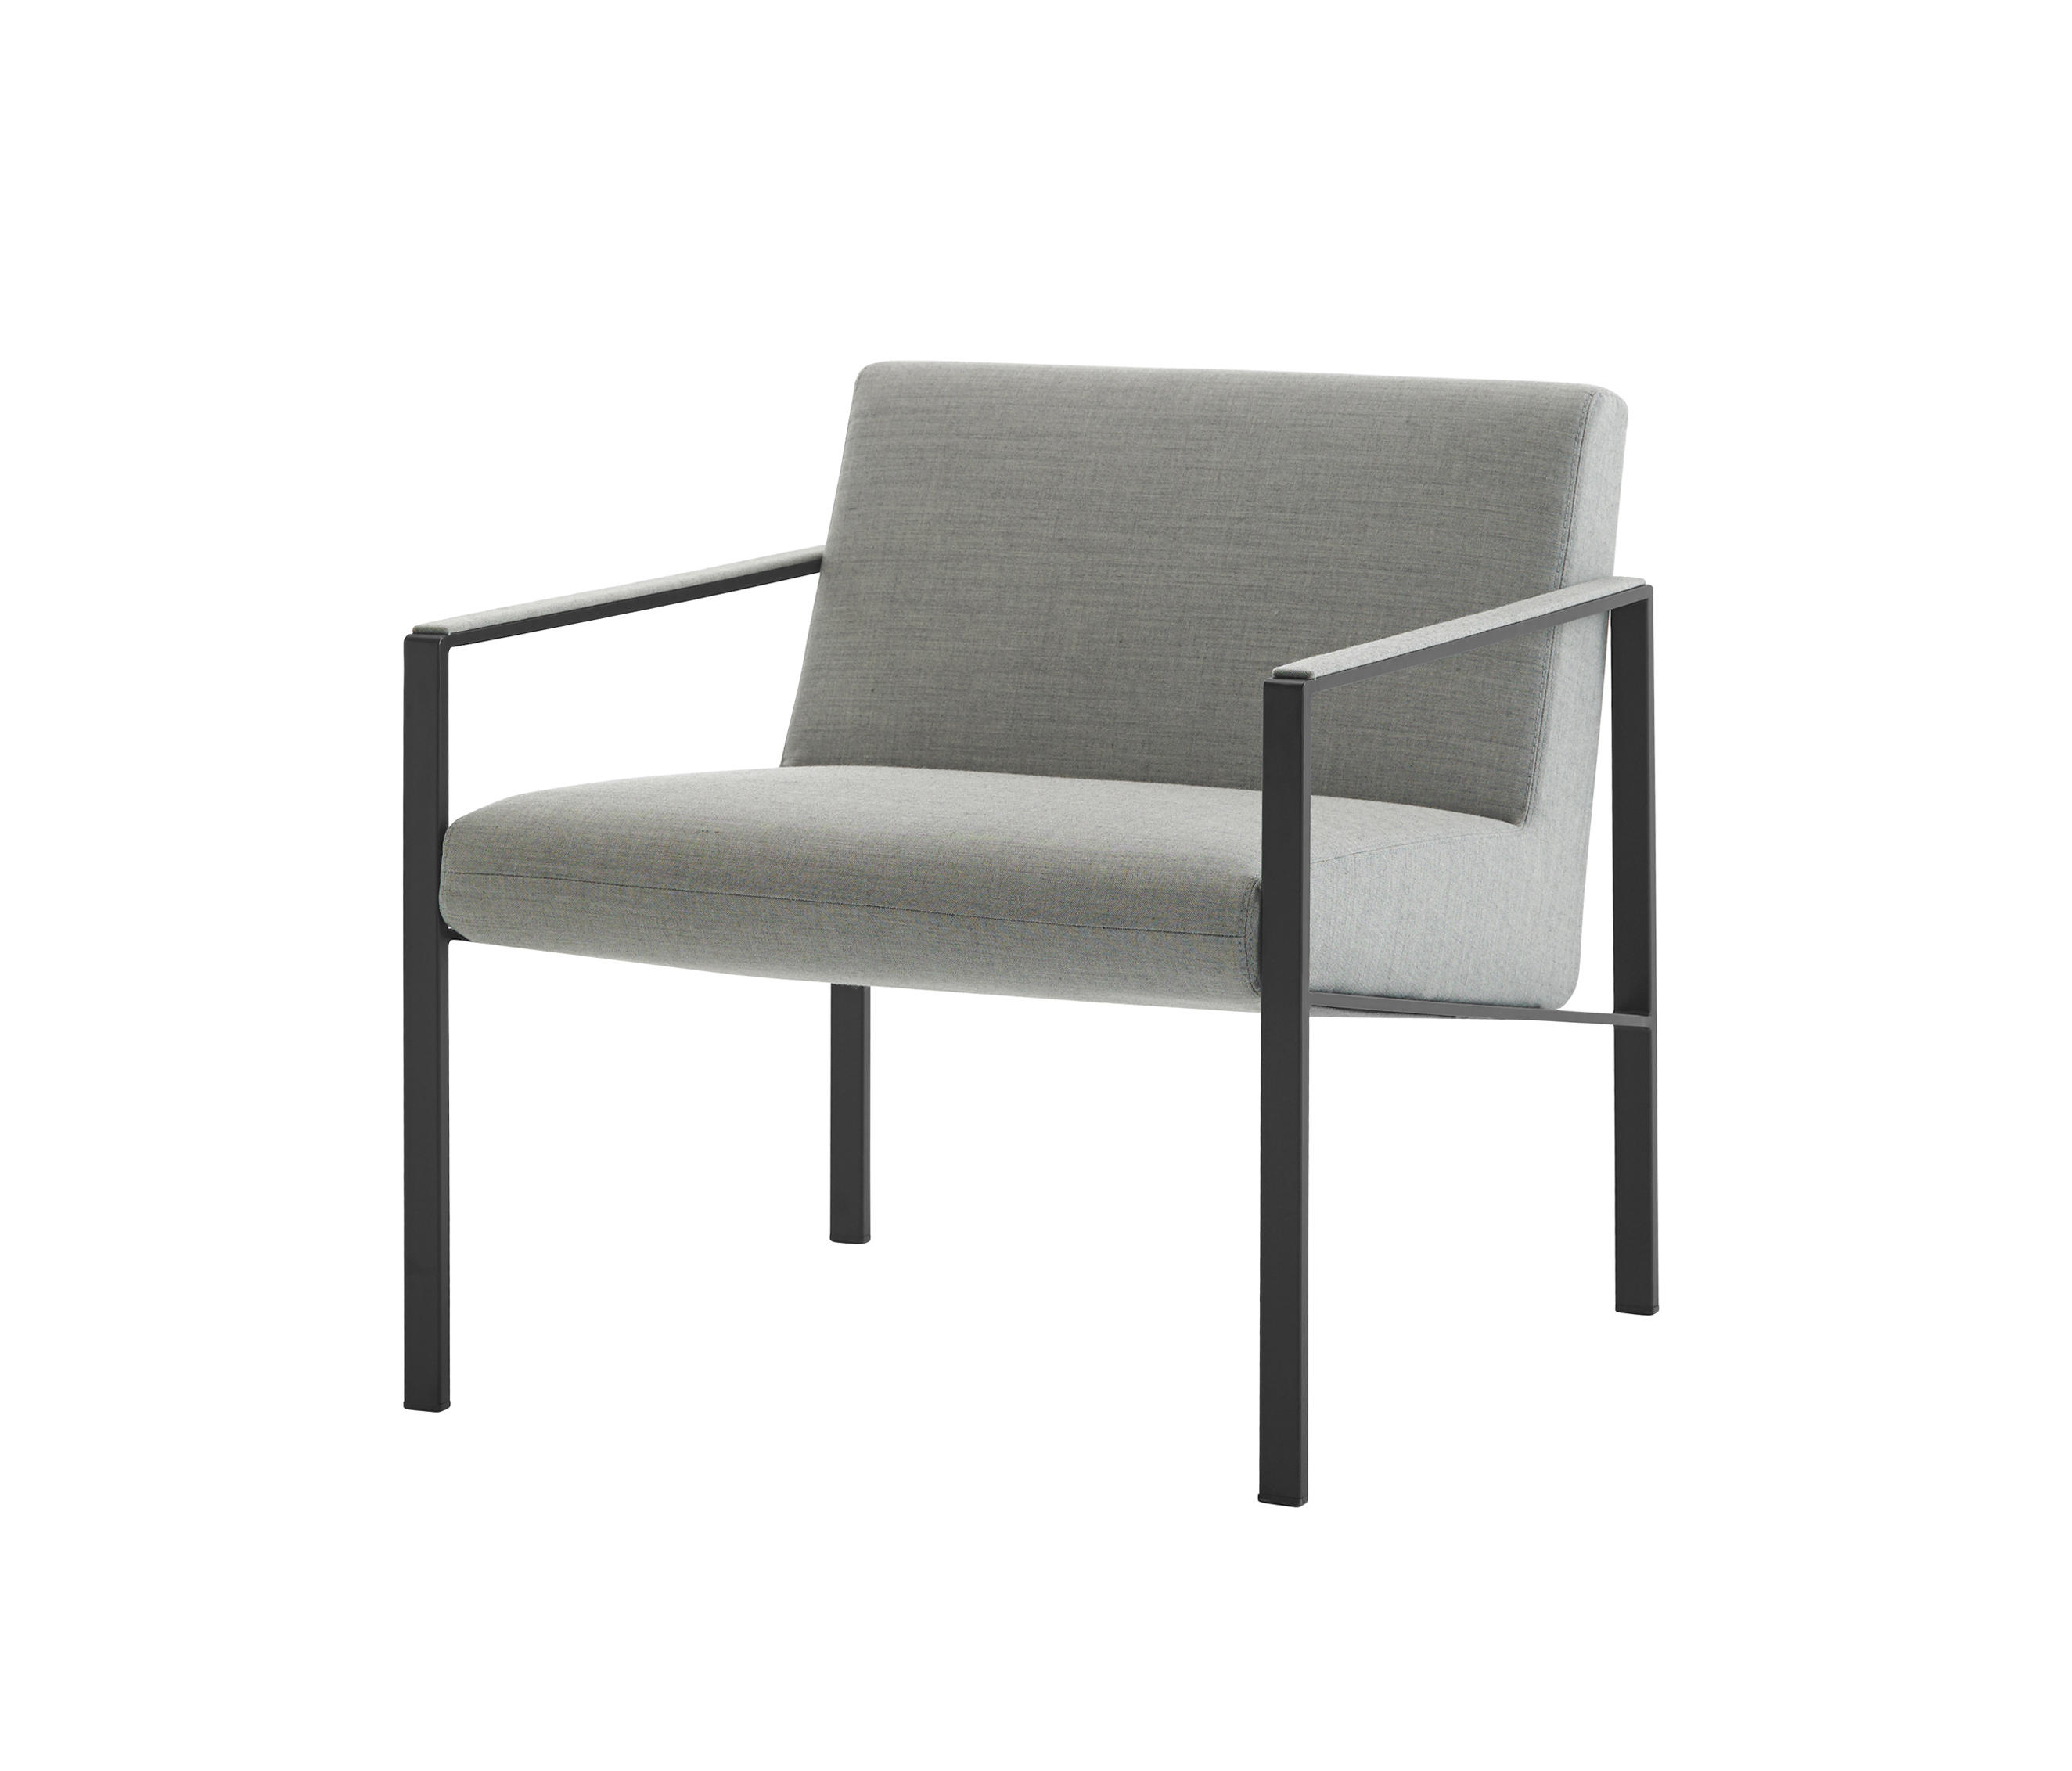 LUND - Armchairs from Inclass | Architonic